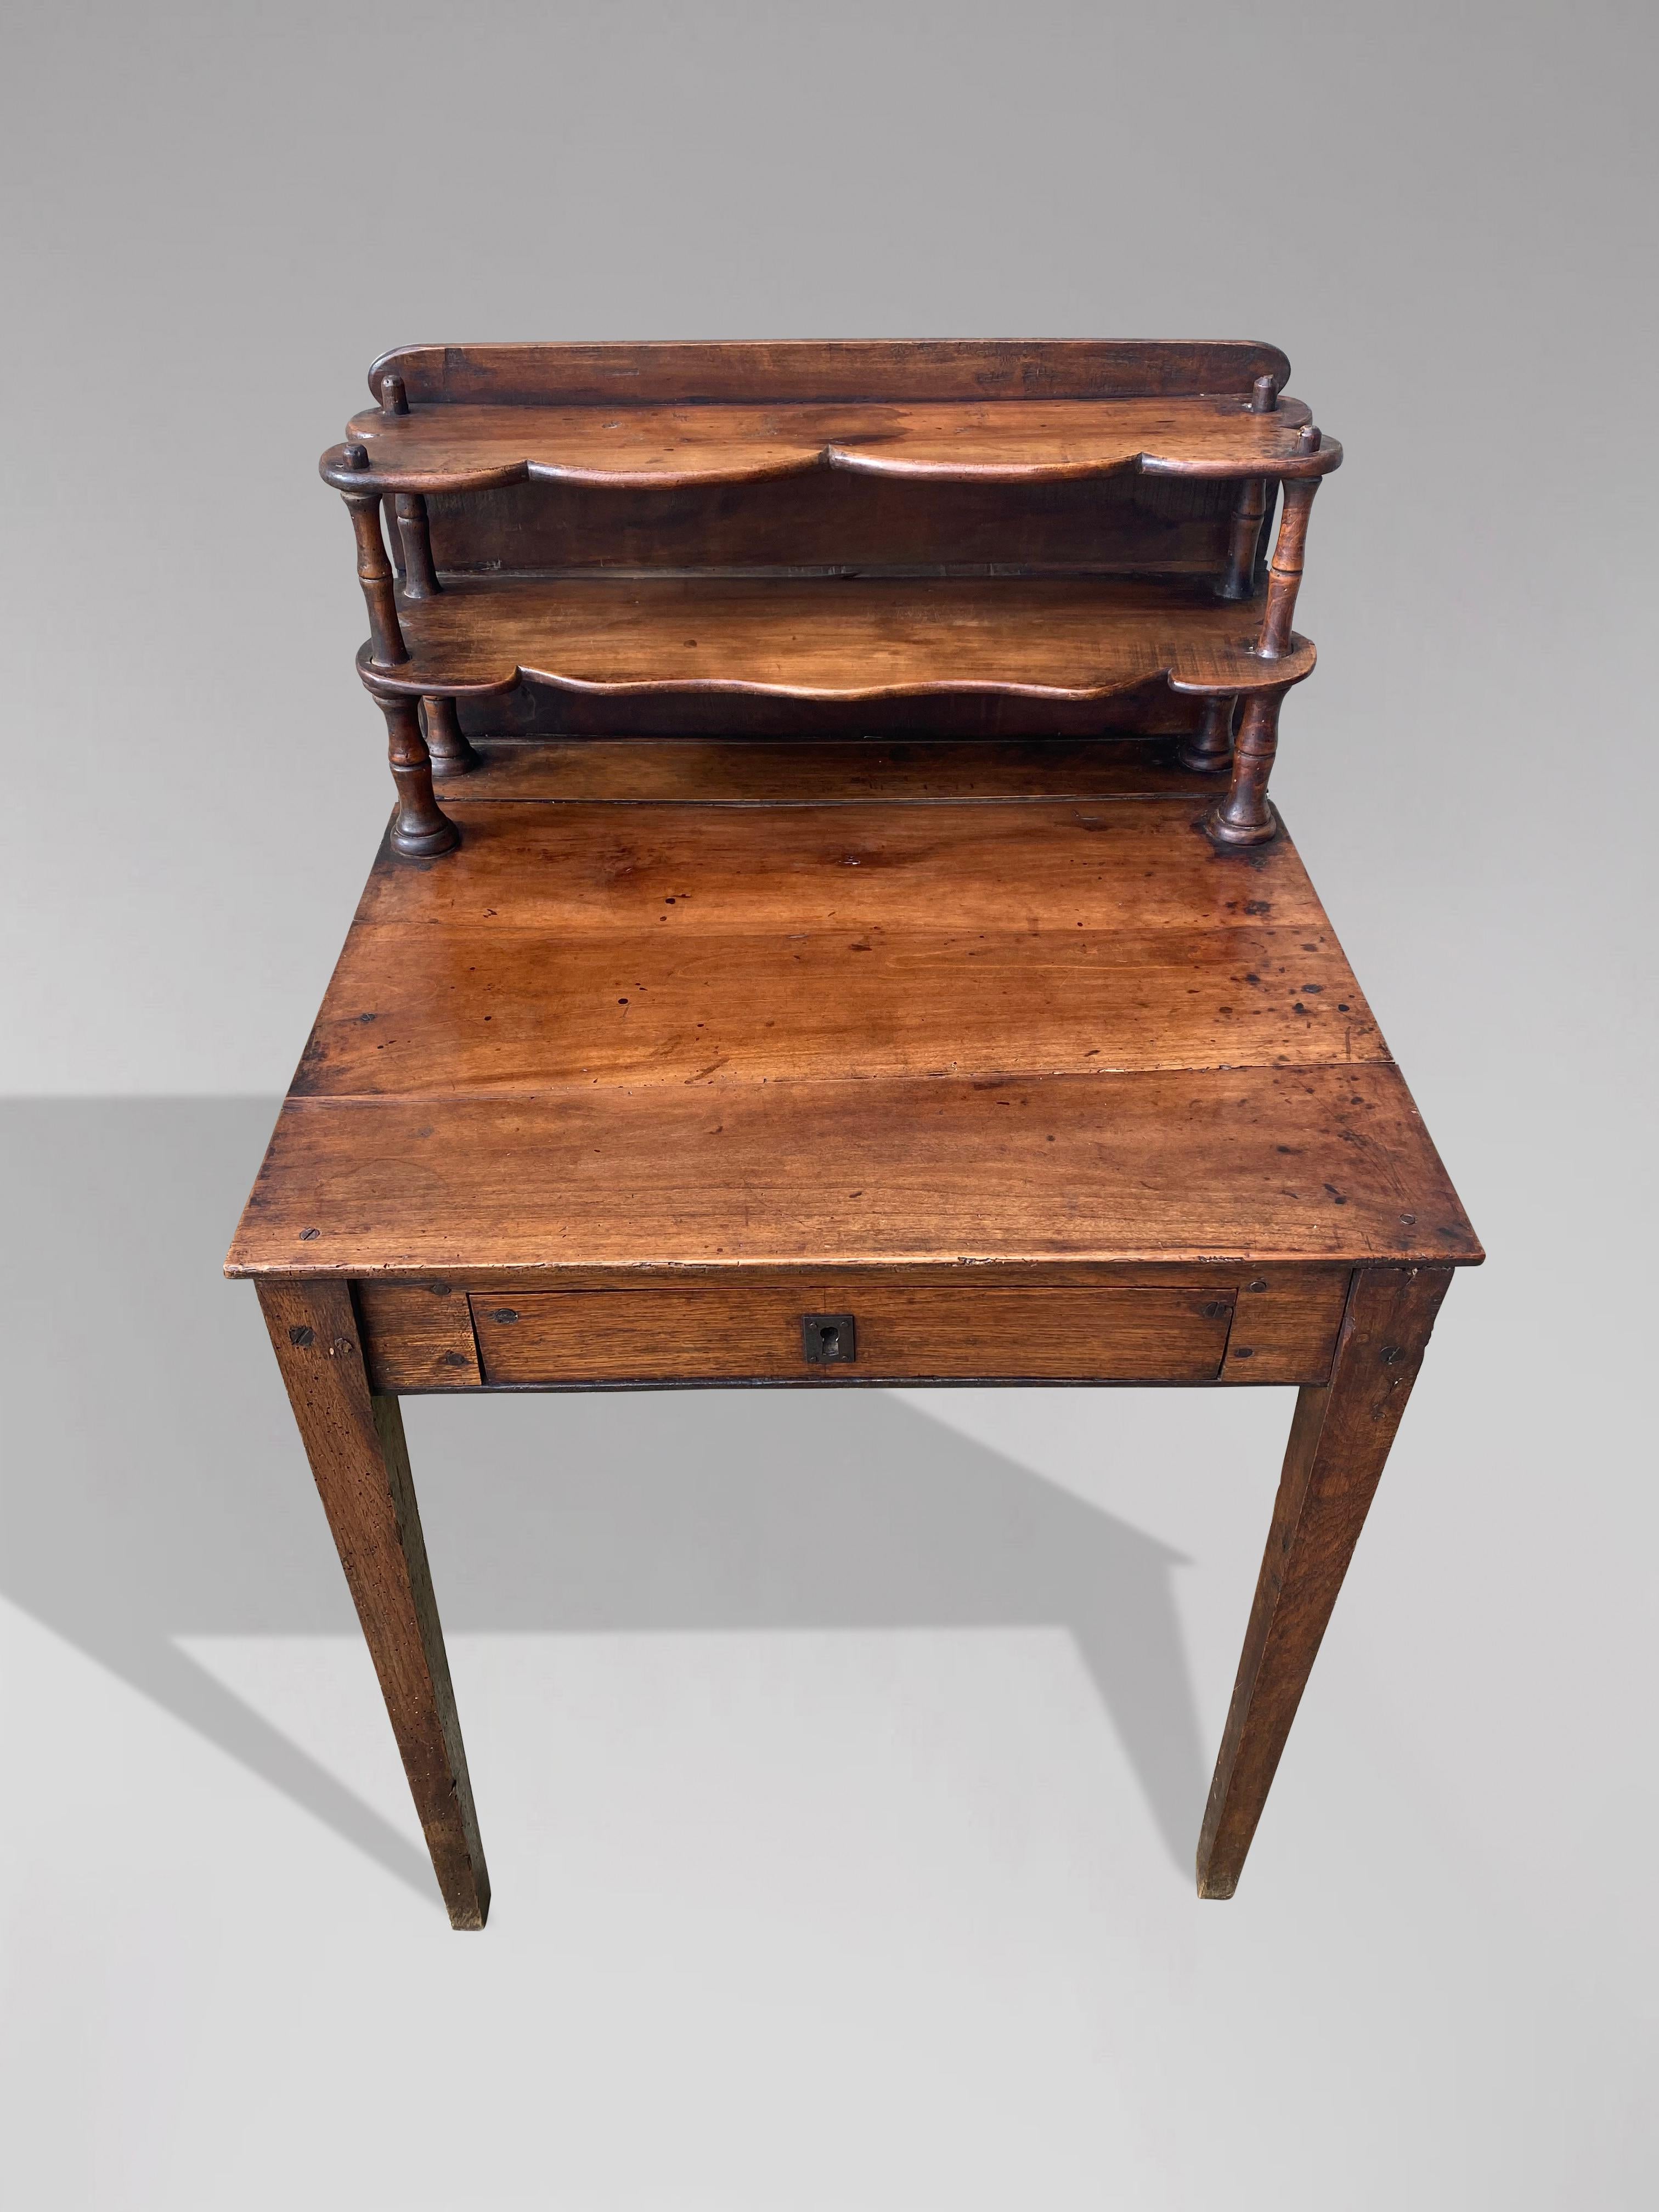 19th Century French Provincial Walnut Writing or Dressing Table In Good Condition For Sale In Petworth,West Sussex, GB